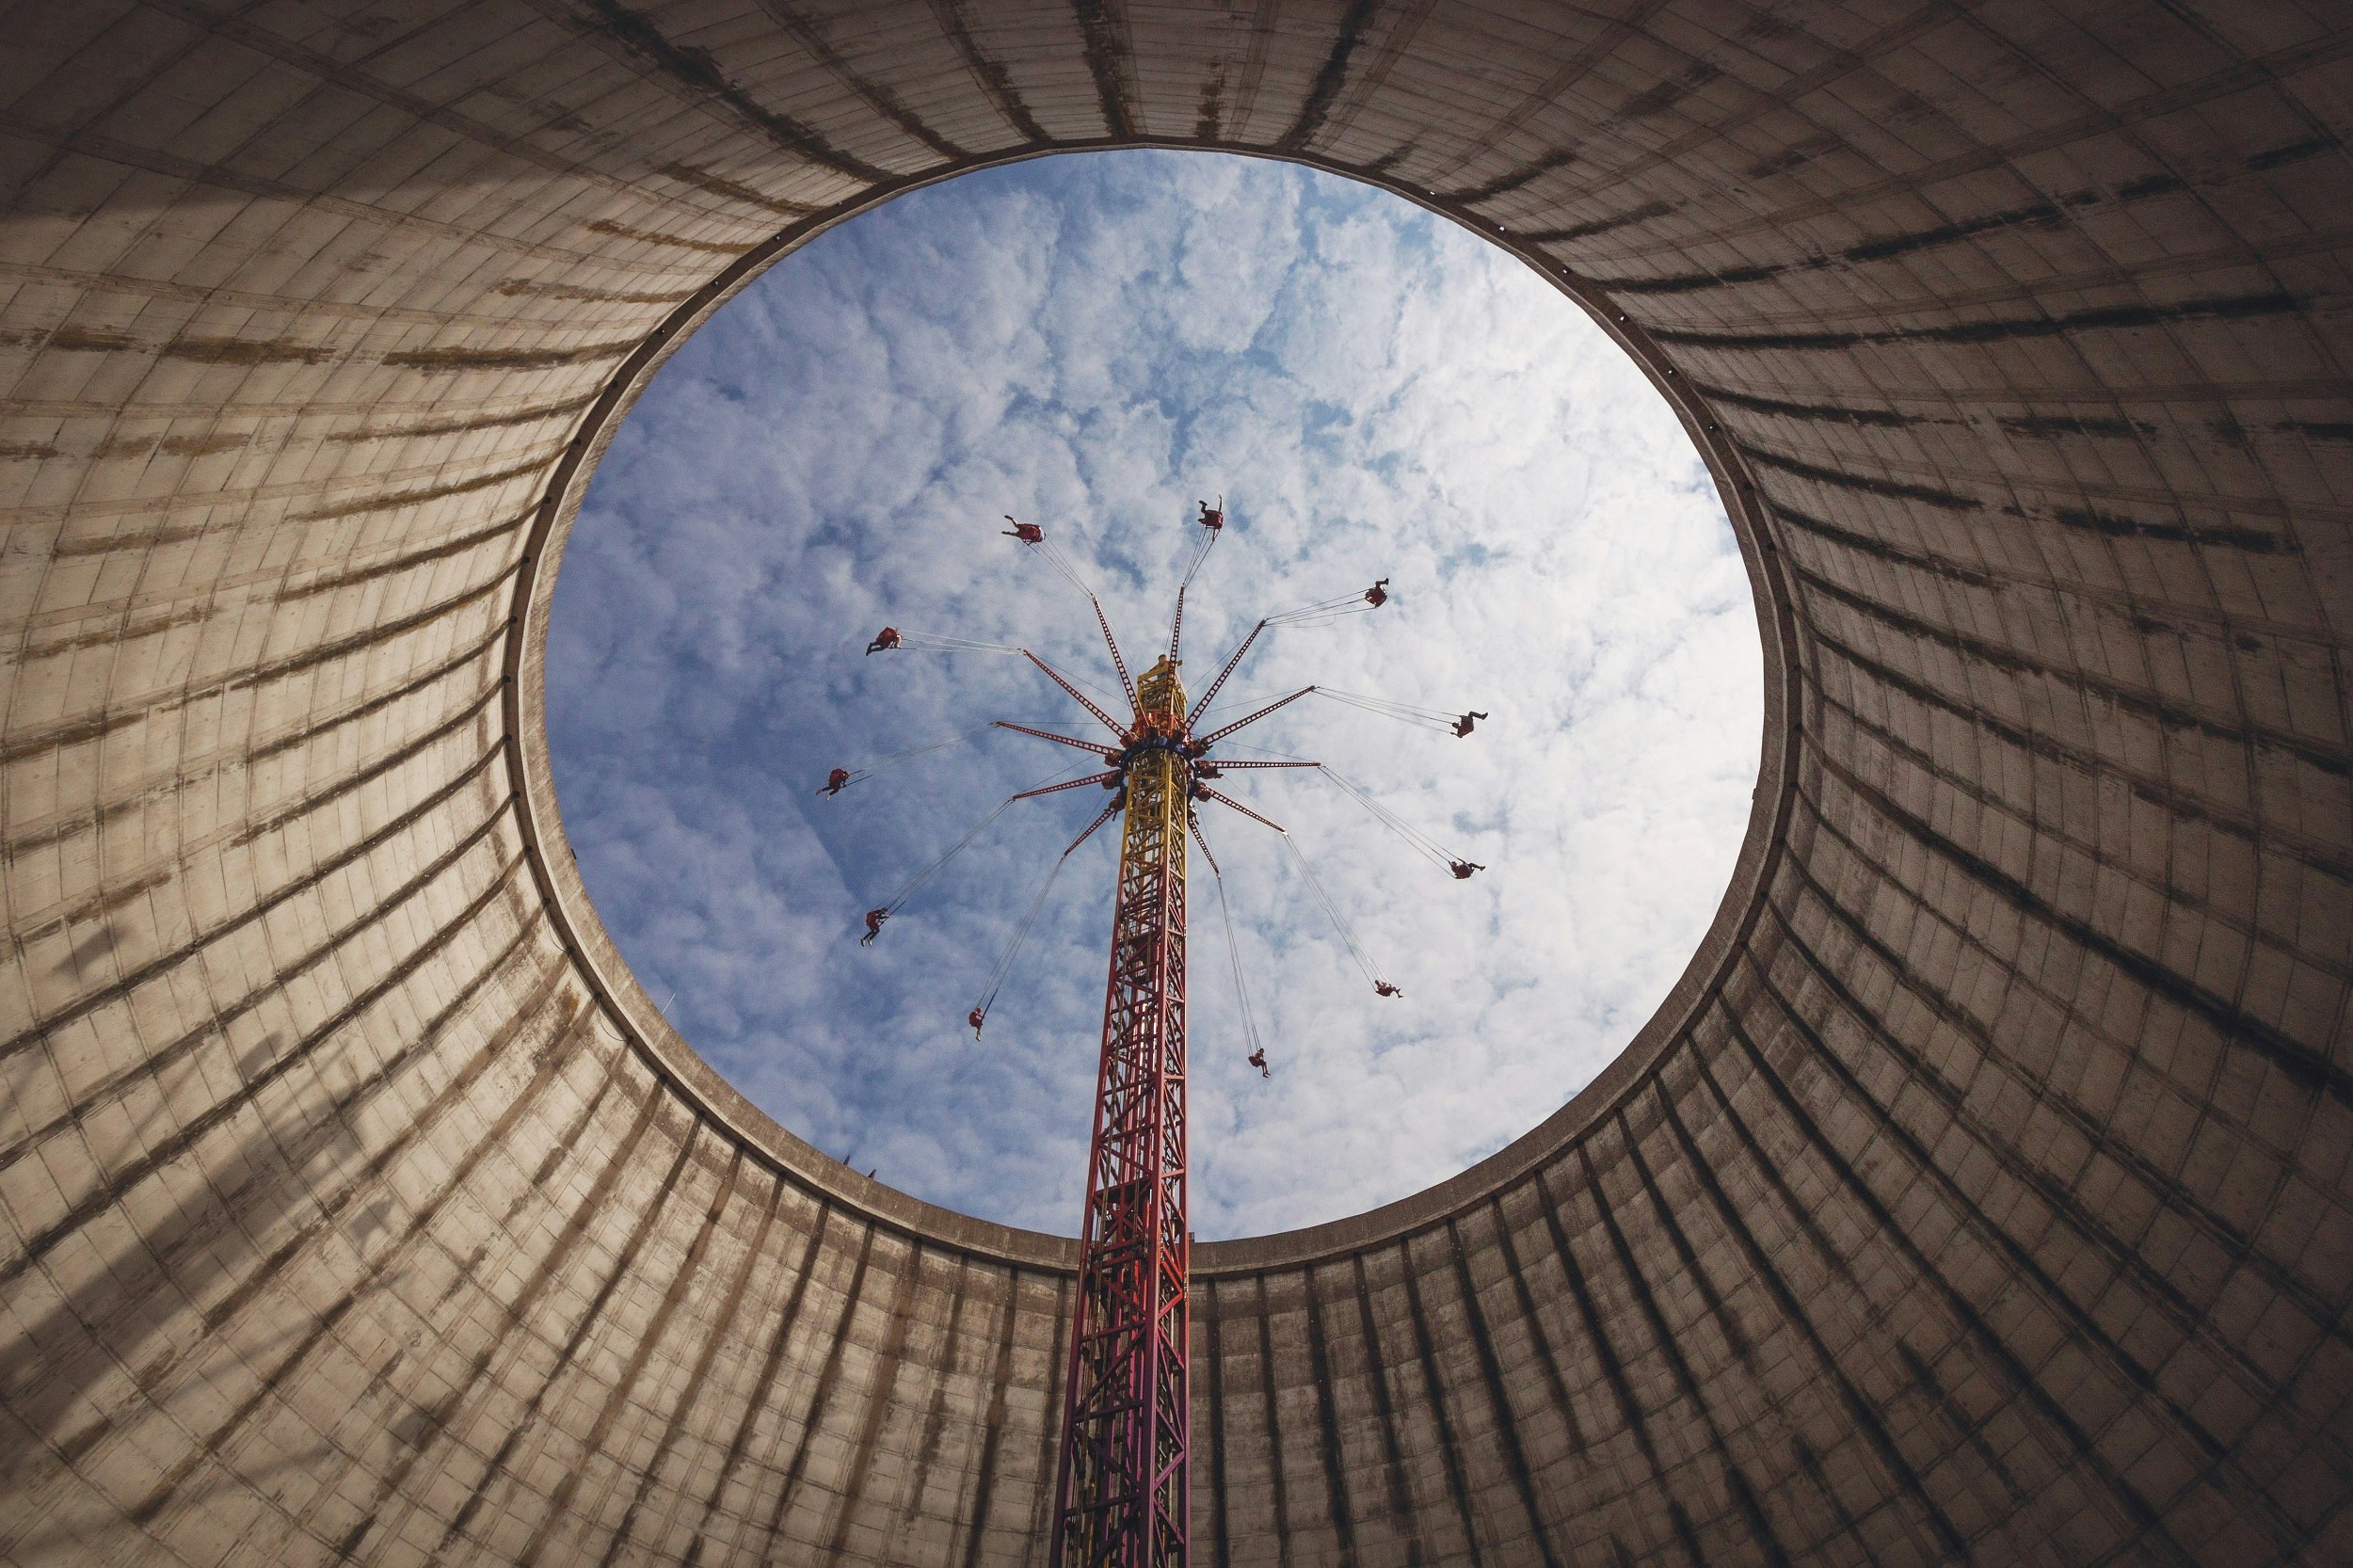 An upwards shot taken within the huge cooling tower of an ex-power plant, with people on swings of a fairground ride at the top.